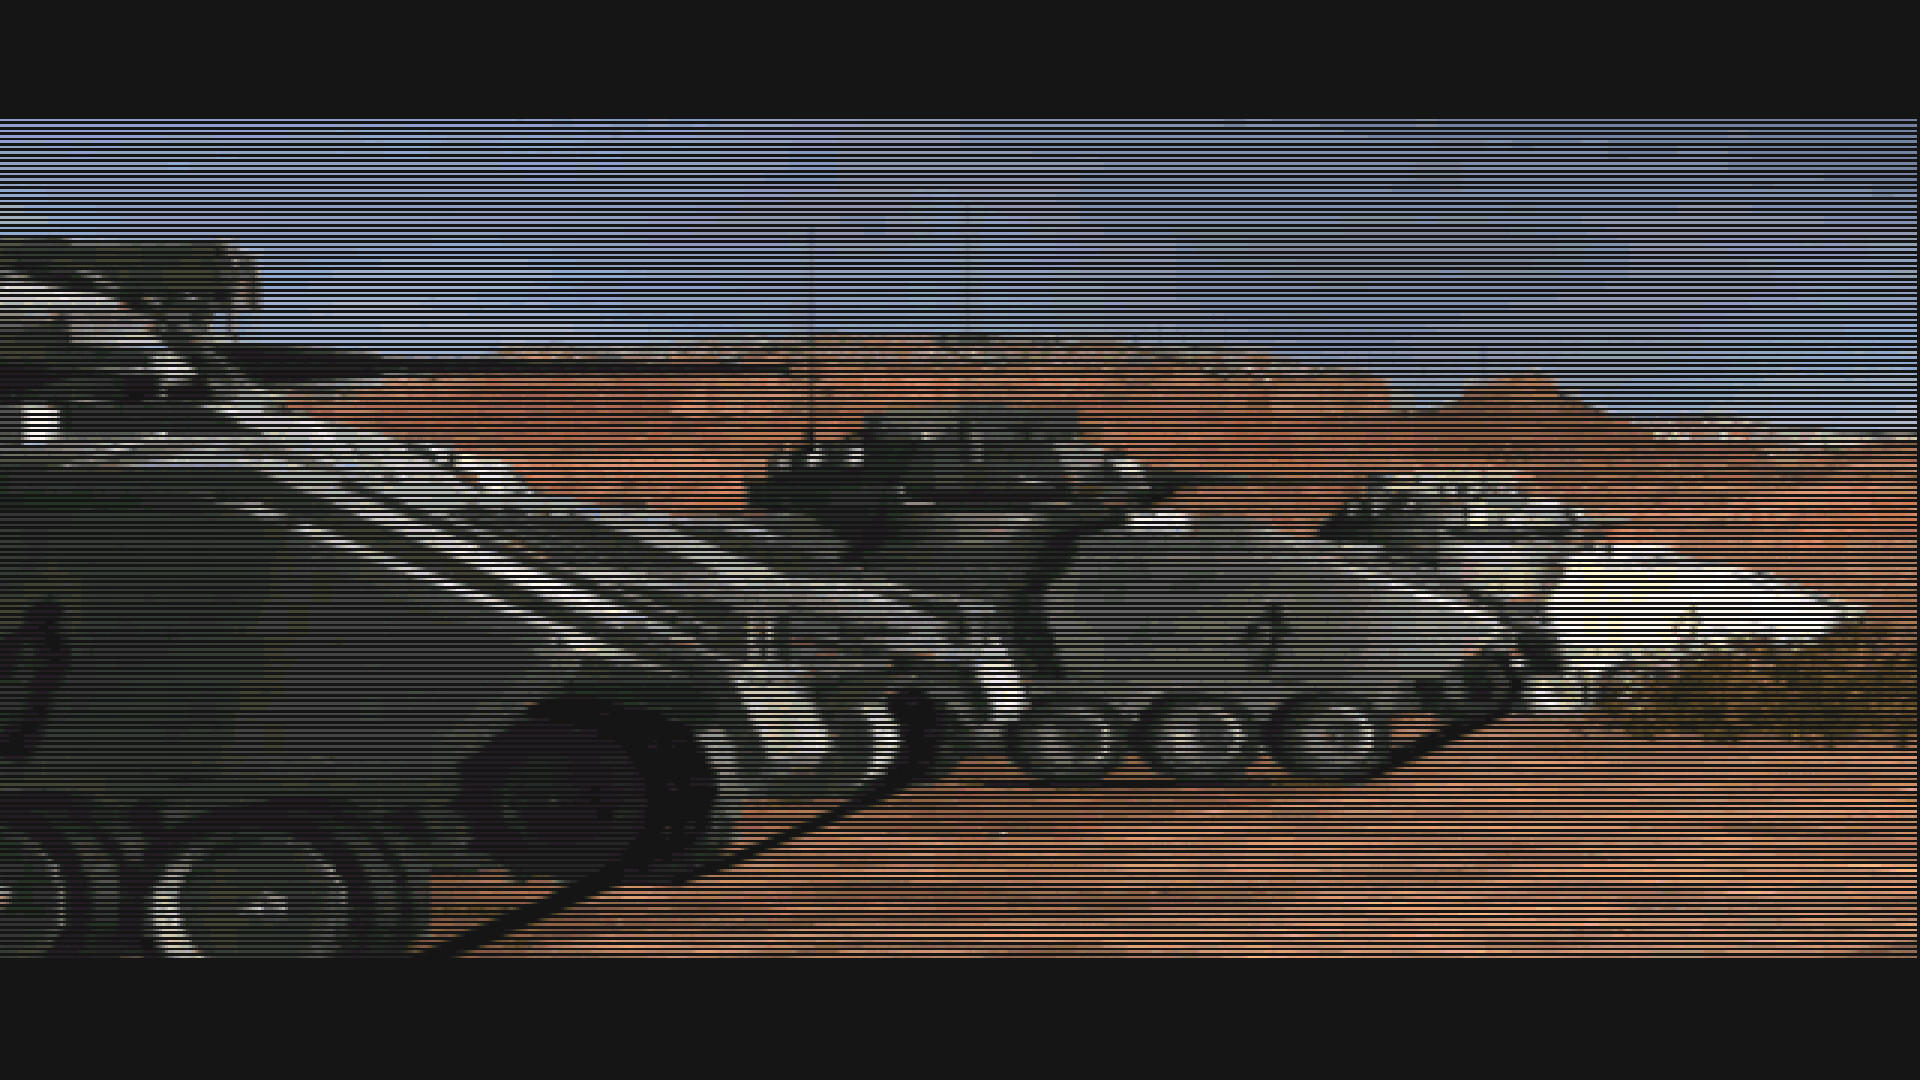 Command & Conquer™ and The Covert Operations™ screenshot game